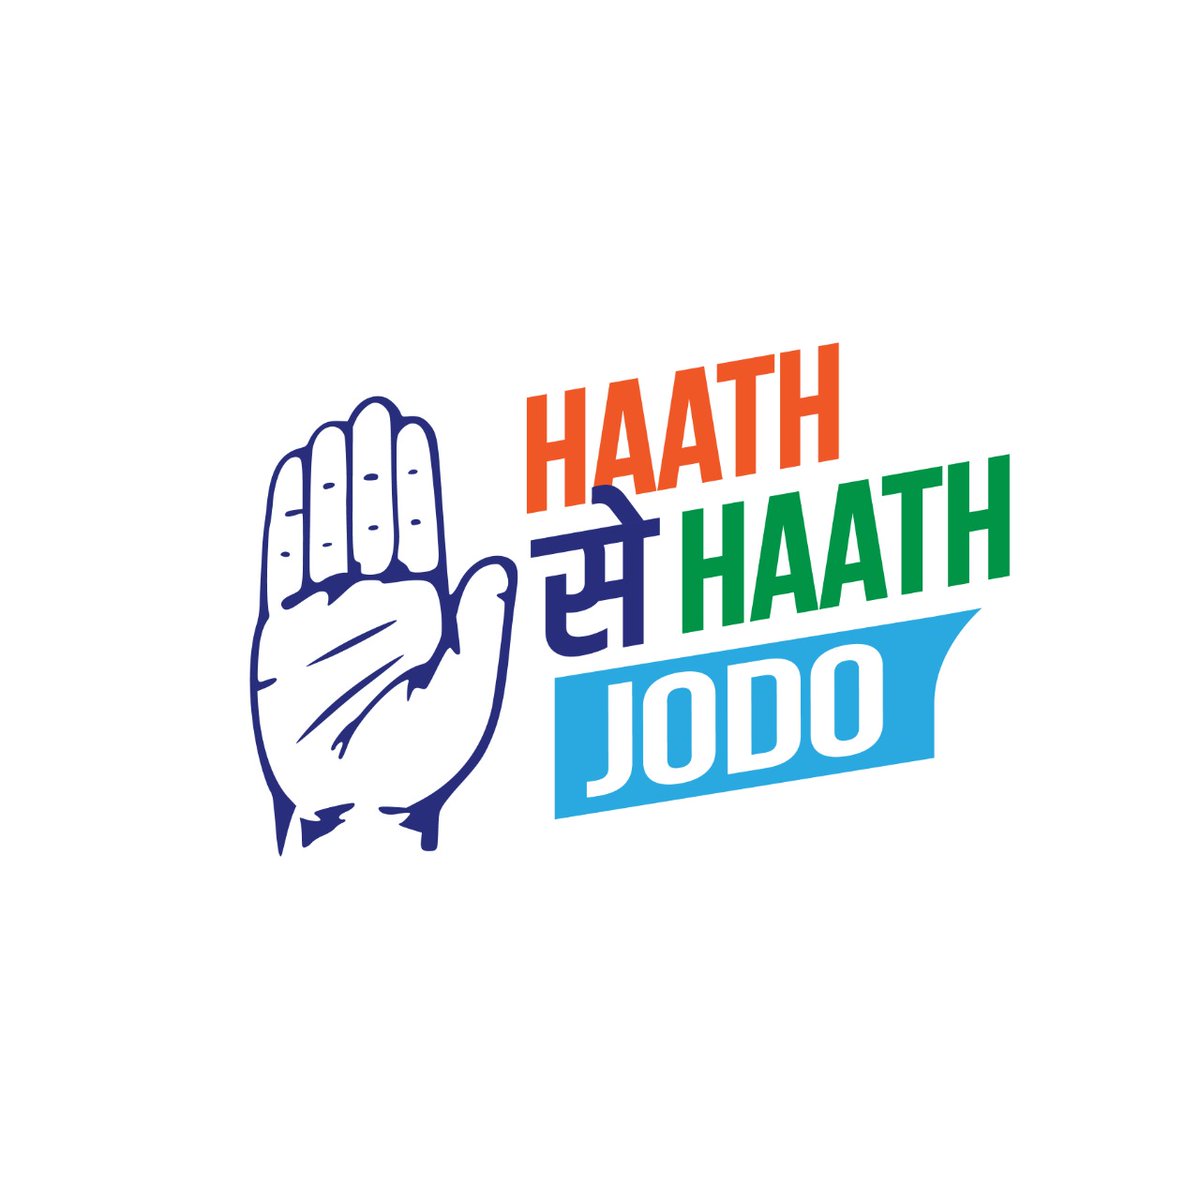 No doubt, now the time has come to  join the hand to hand  and march forward to resettle the unity , prosperity & communal harmony in the country.                                              #HaathSeHaathJodo                         #Unity #Prosperity #Communalharmony